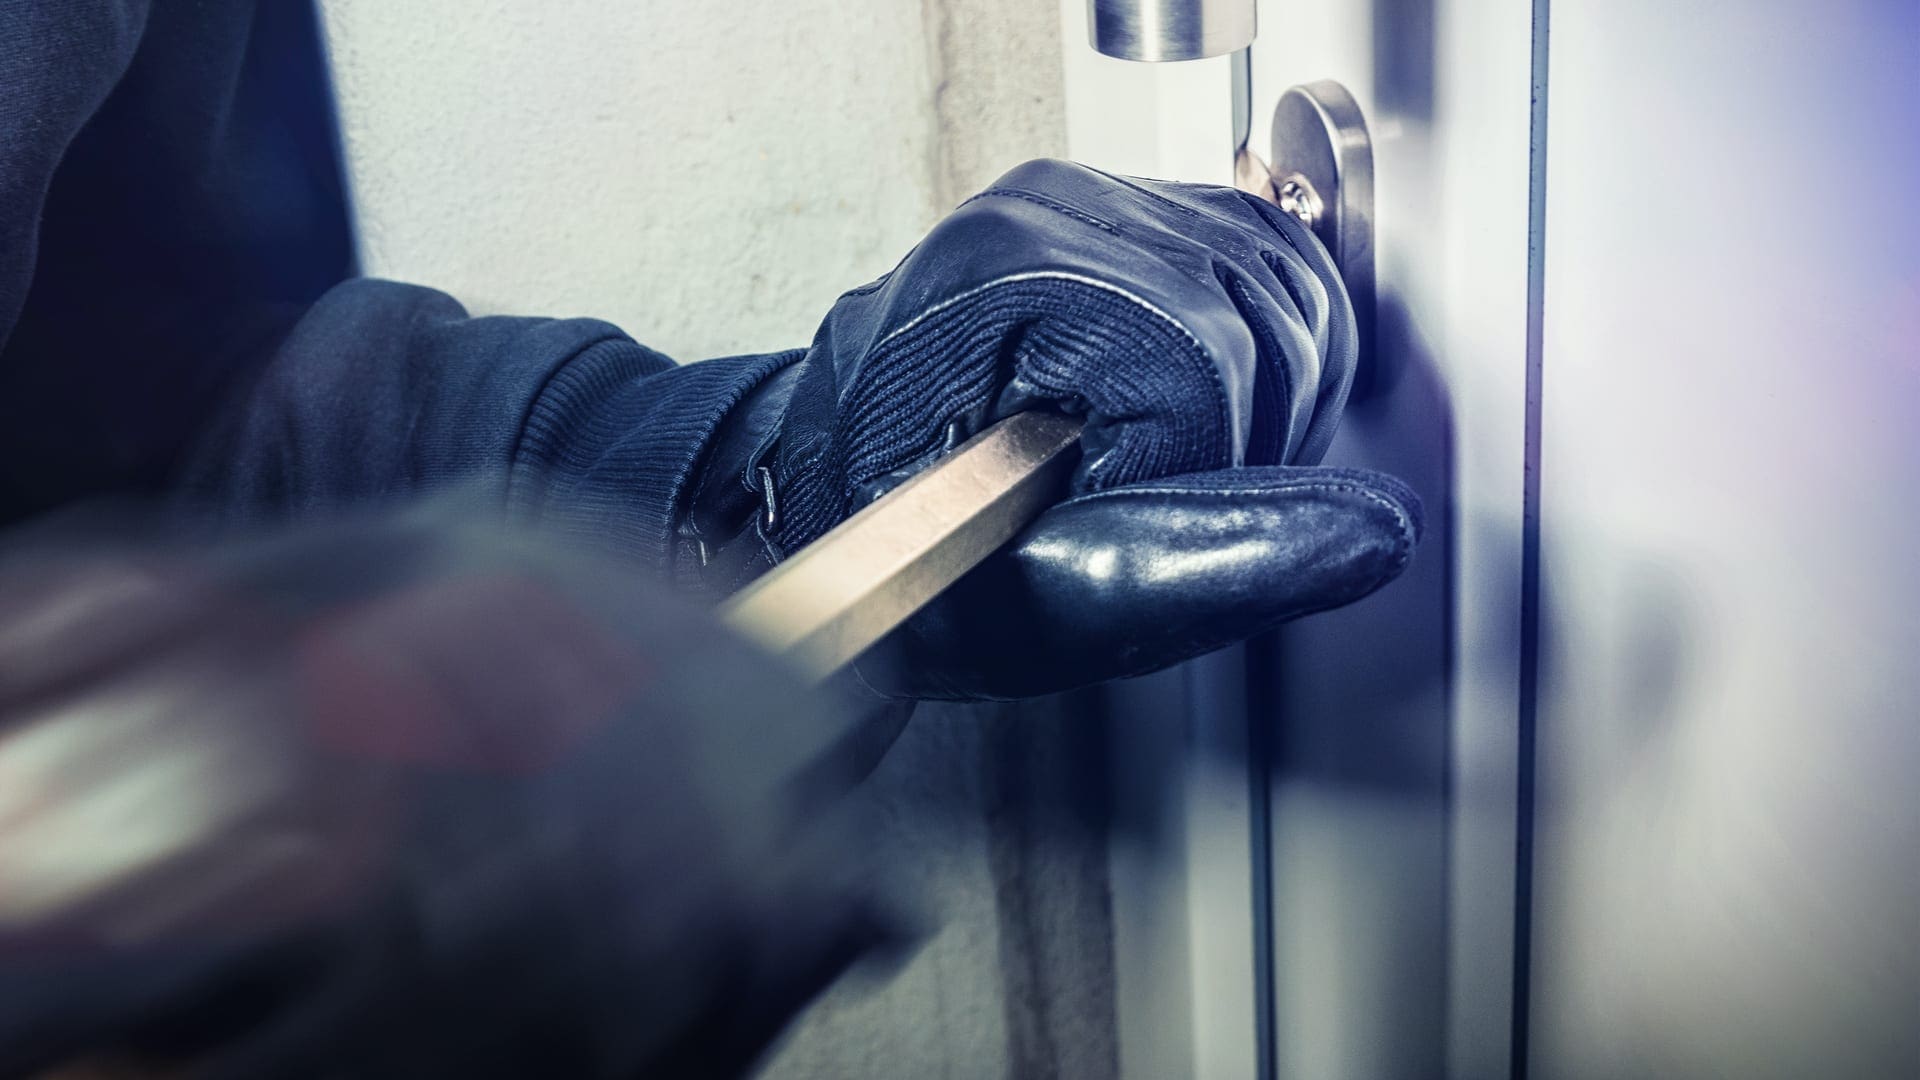 A burglar trying to open a lock used for preventing a burglary